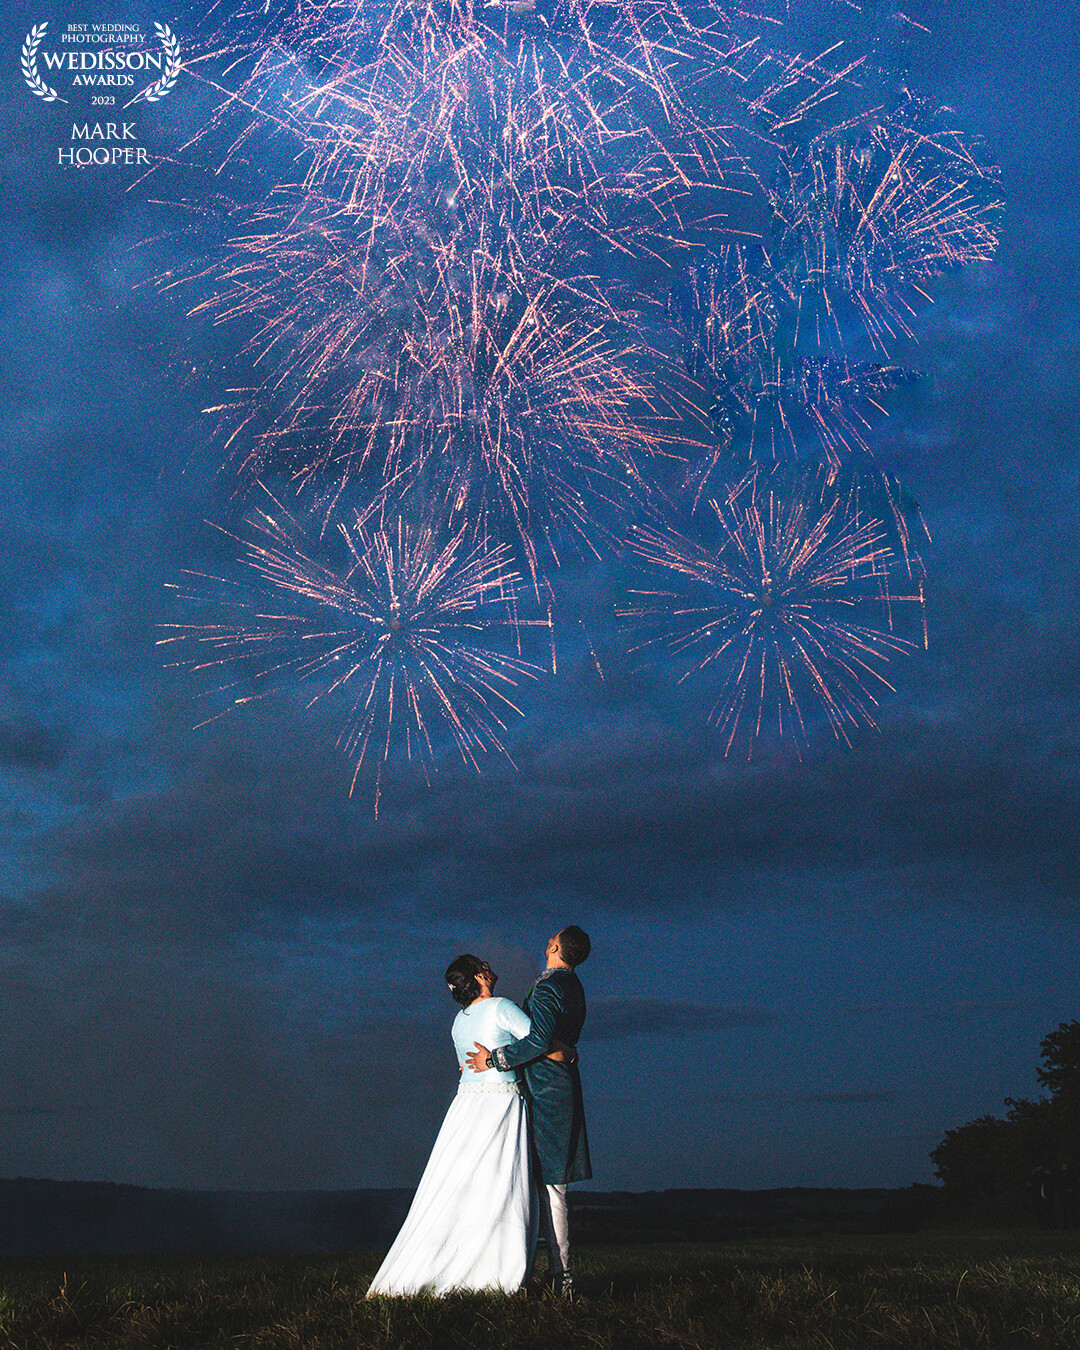 Out with a bang! A stunning end to the wedding with a huge firework display.